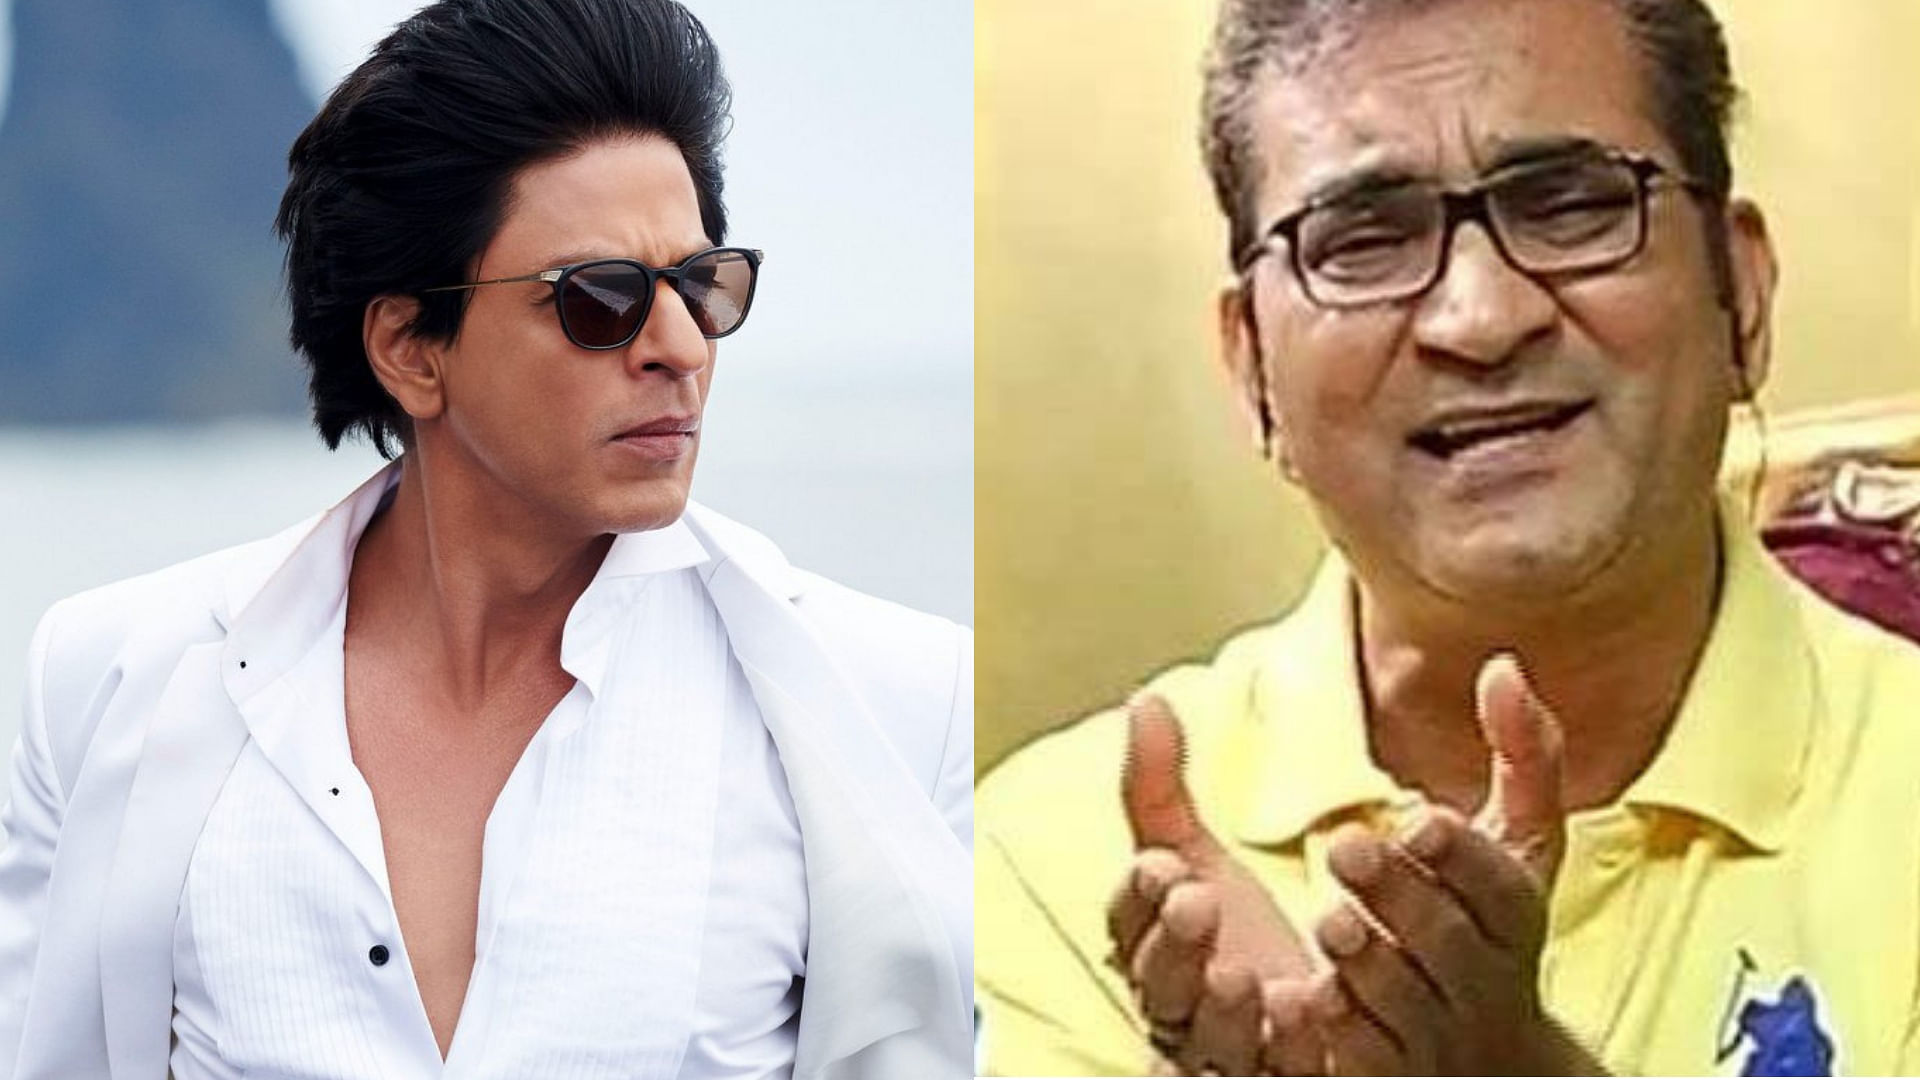 Playback singer, Abhijeet revealed why he stopped lending his voice to Shah Rukh Khan on screen.